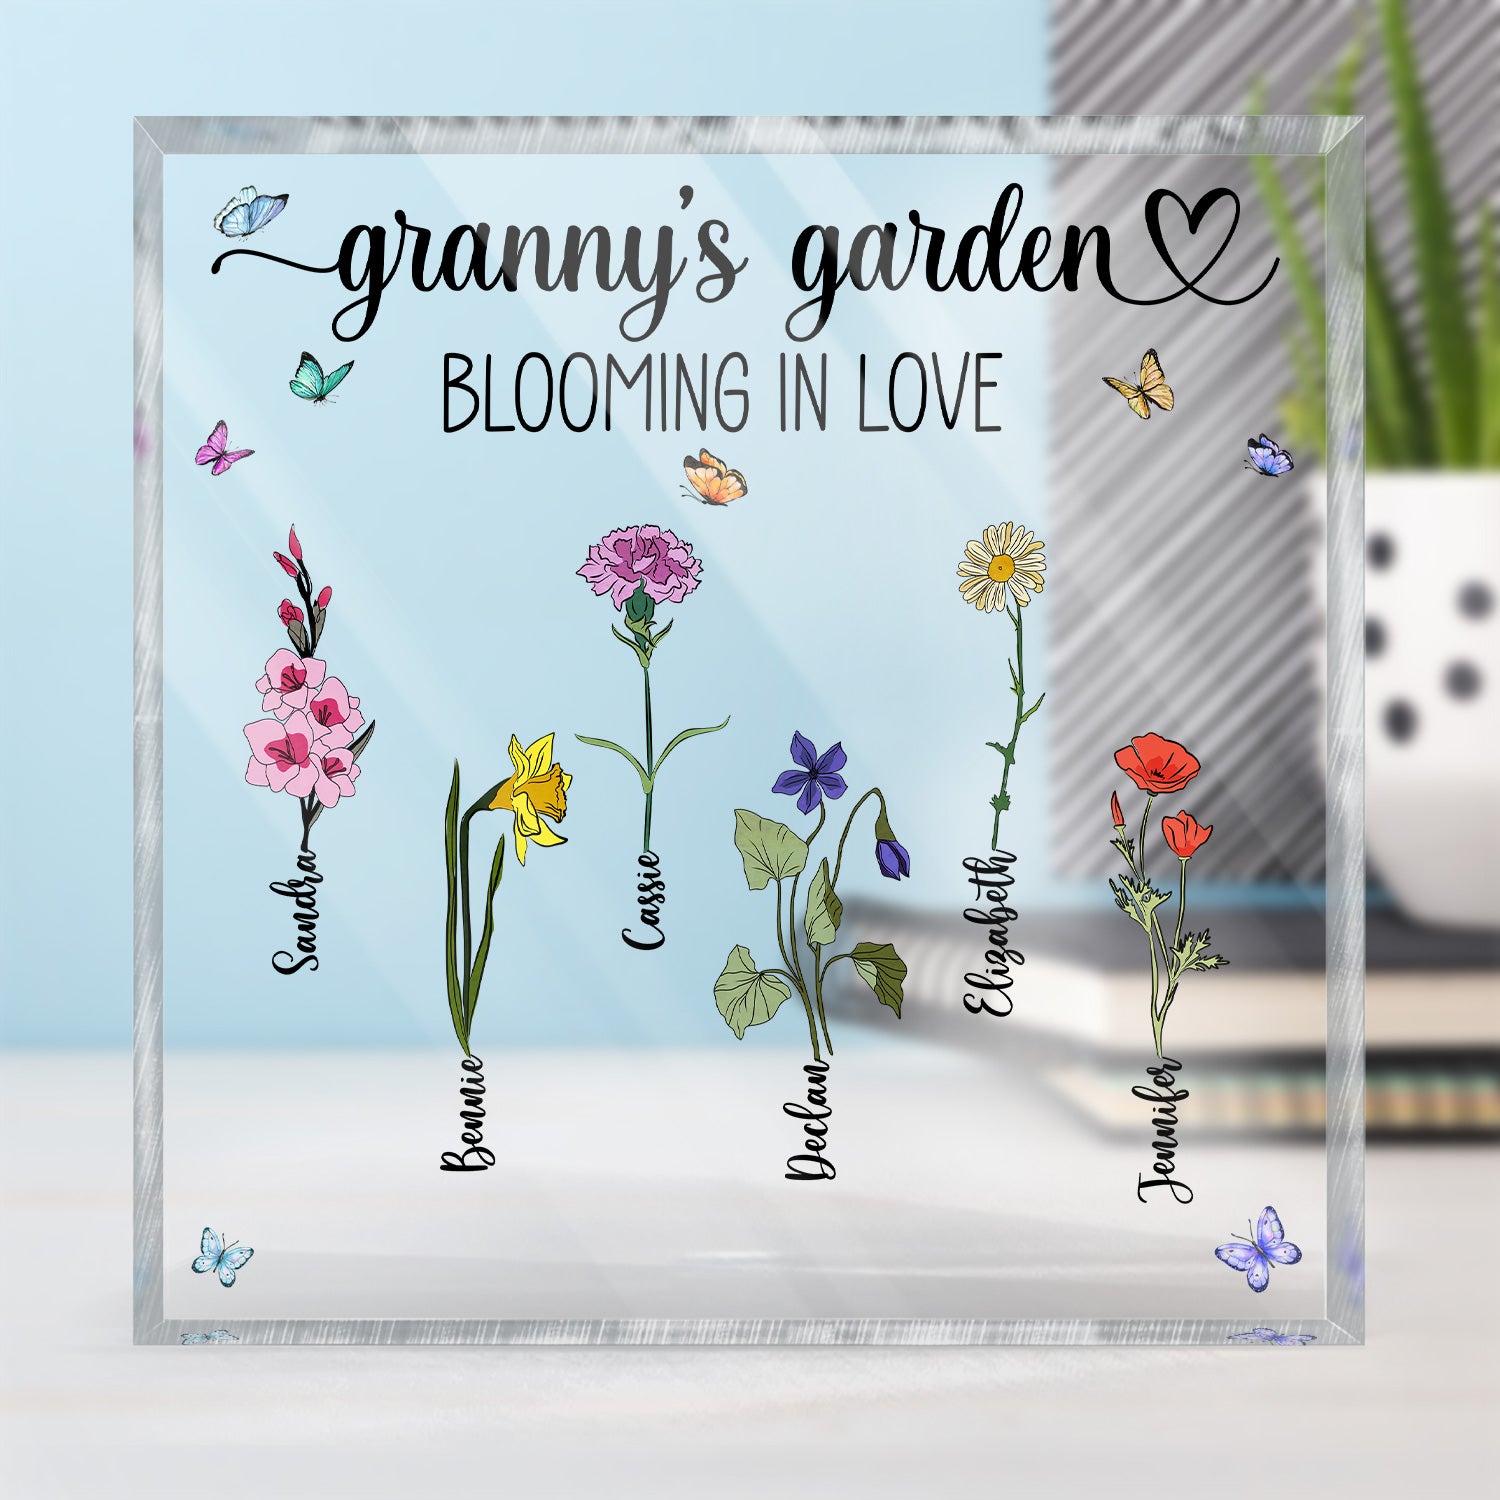 Granny's Garden Love Grows Here - Birthday, Loving Gift For Mom, Mum, Mother, Nana, Grandma - Personalized Square Shaped Acrylic Plaque